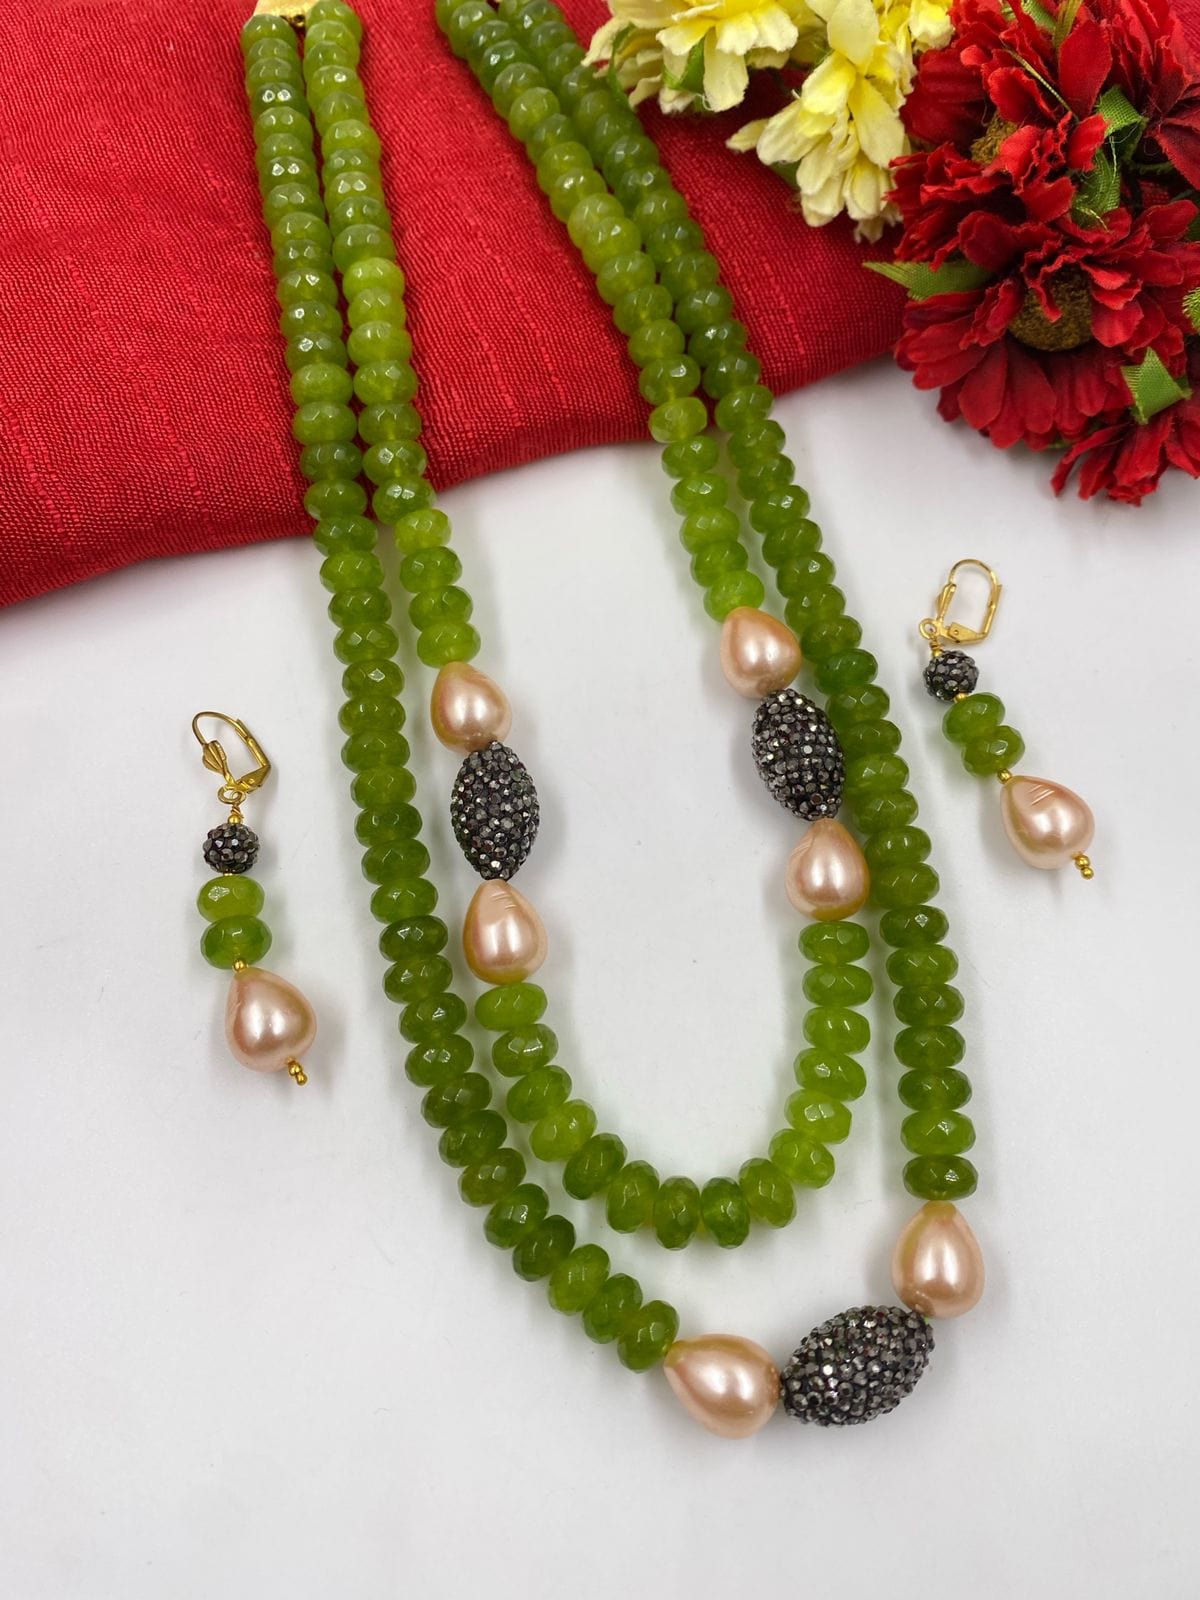 Fashionable Parrot Green Jade Beads Necklace For Women Online Beads Jewellery